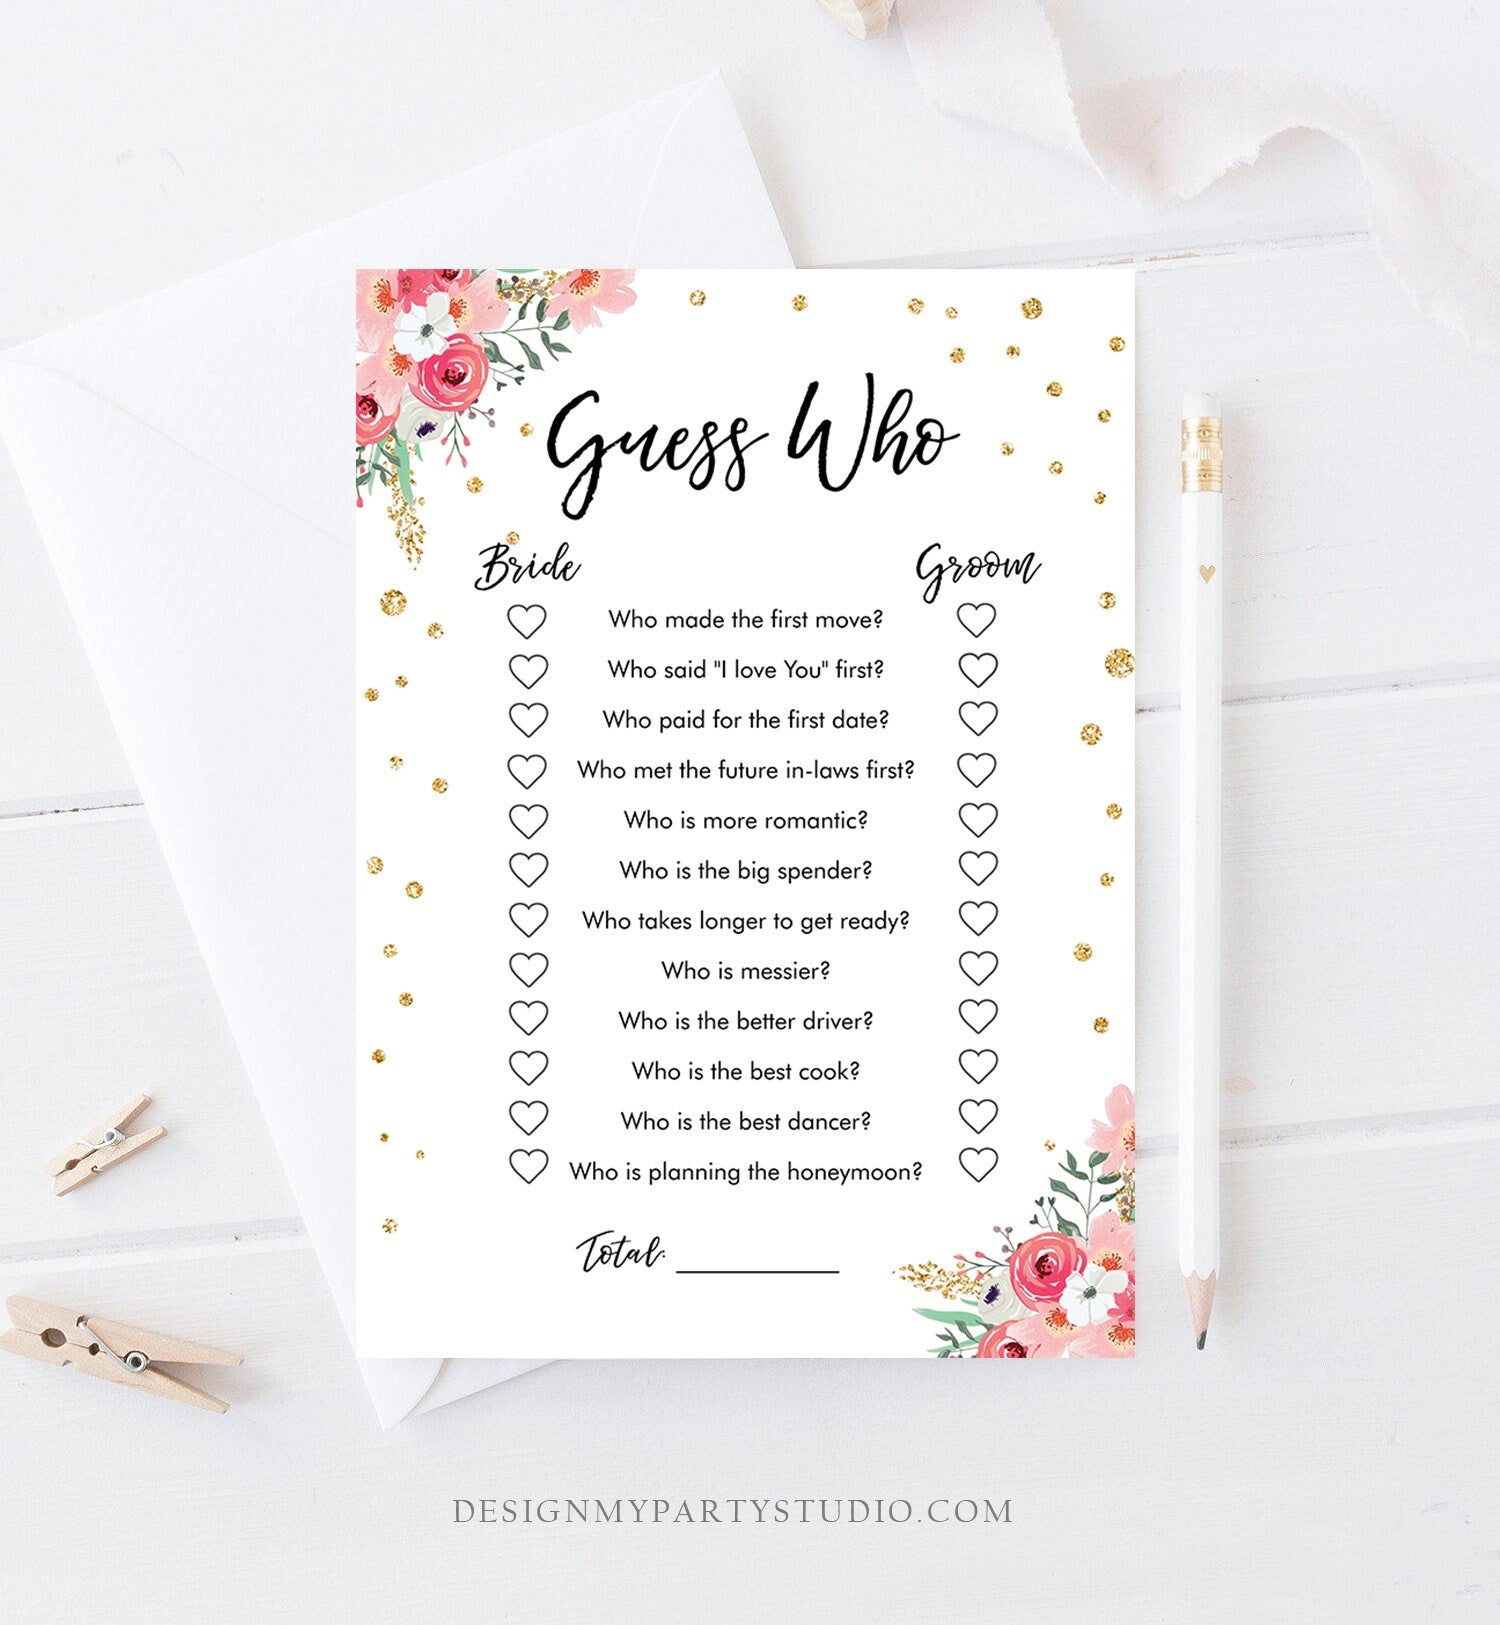 Editable Guess Who Bridal Shower Game Floral Bride Groom Said Wedding Shower Activity Flowers Pink Gold Corjl Template Printable 0030